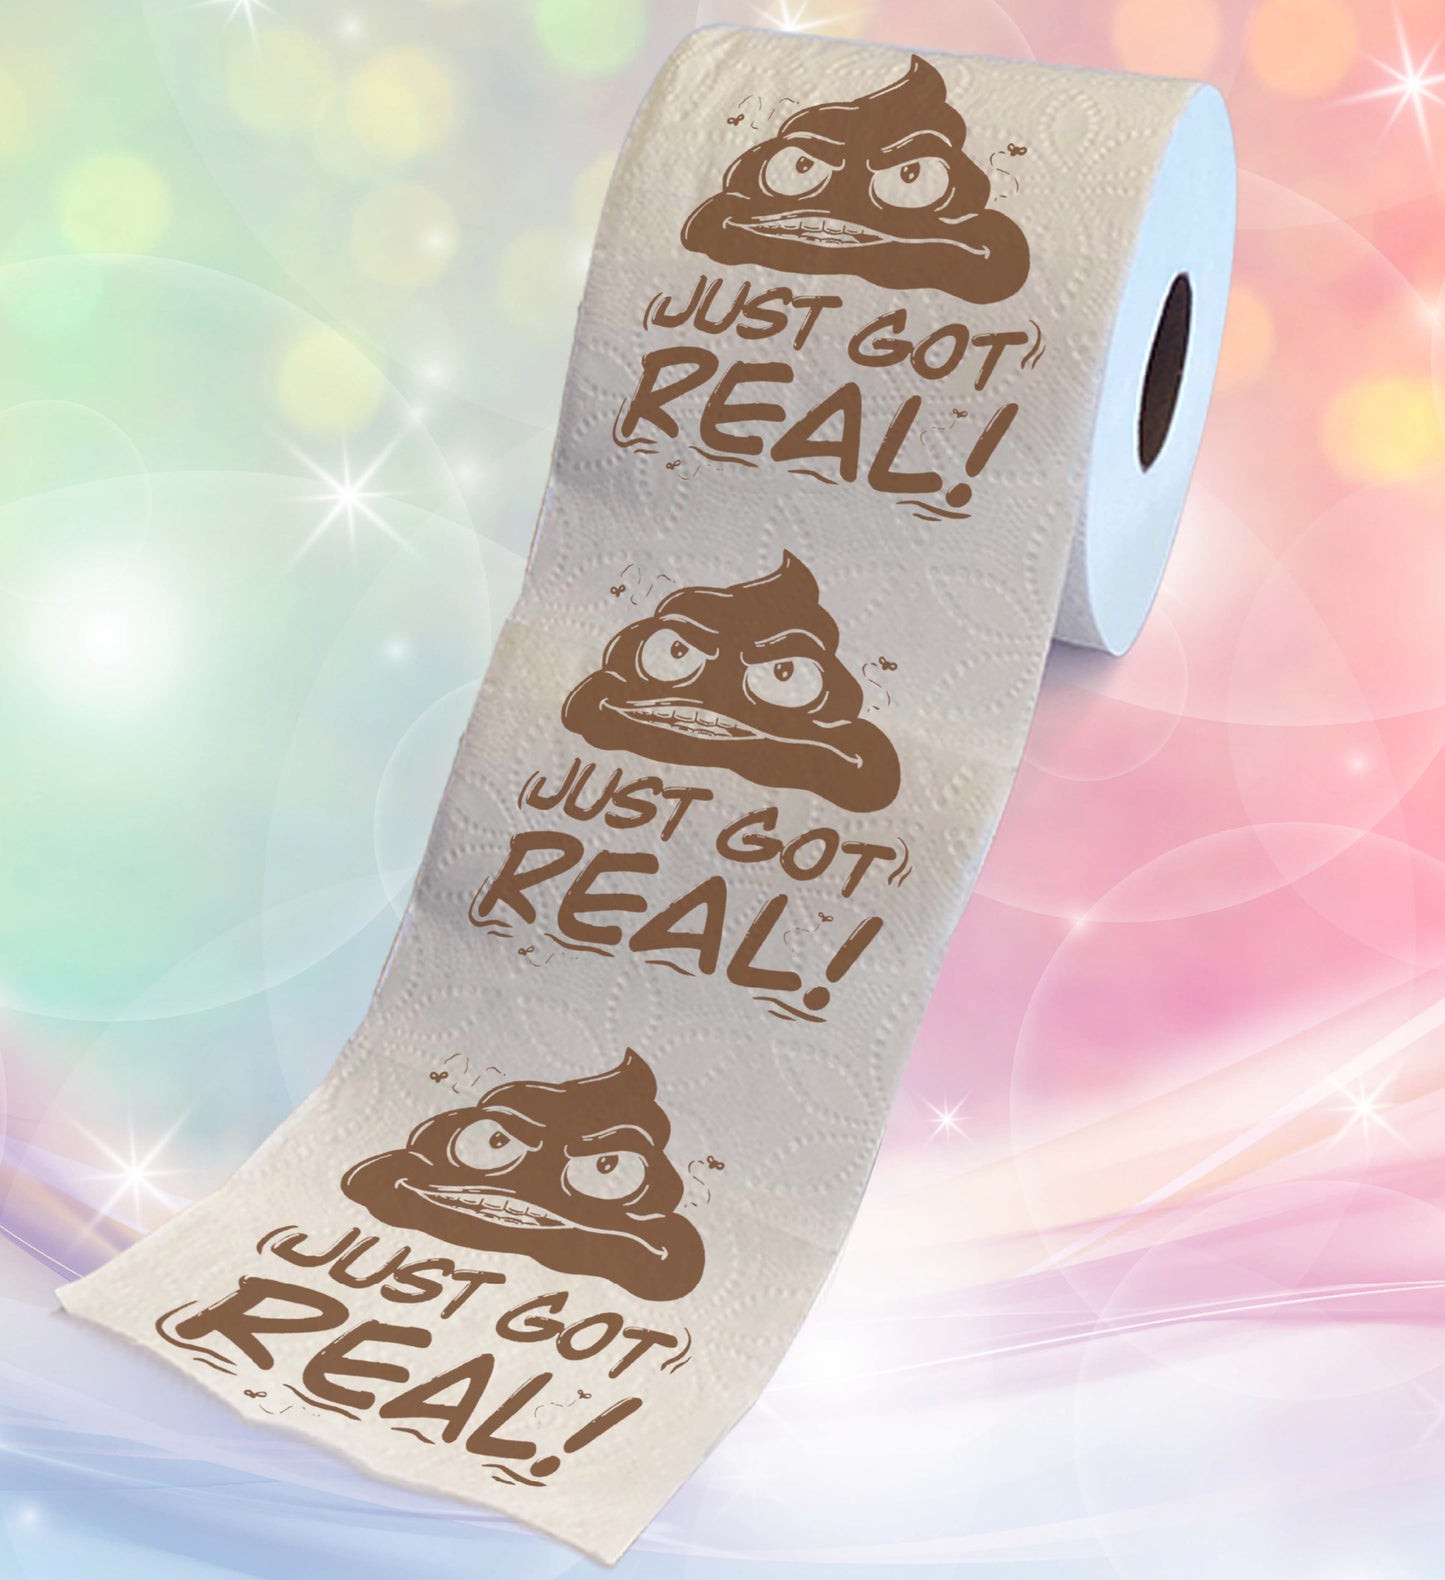 Printed TP Poop Just Got Real Printed Toilet Paper Funny Gag Gift – 500 Sheets